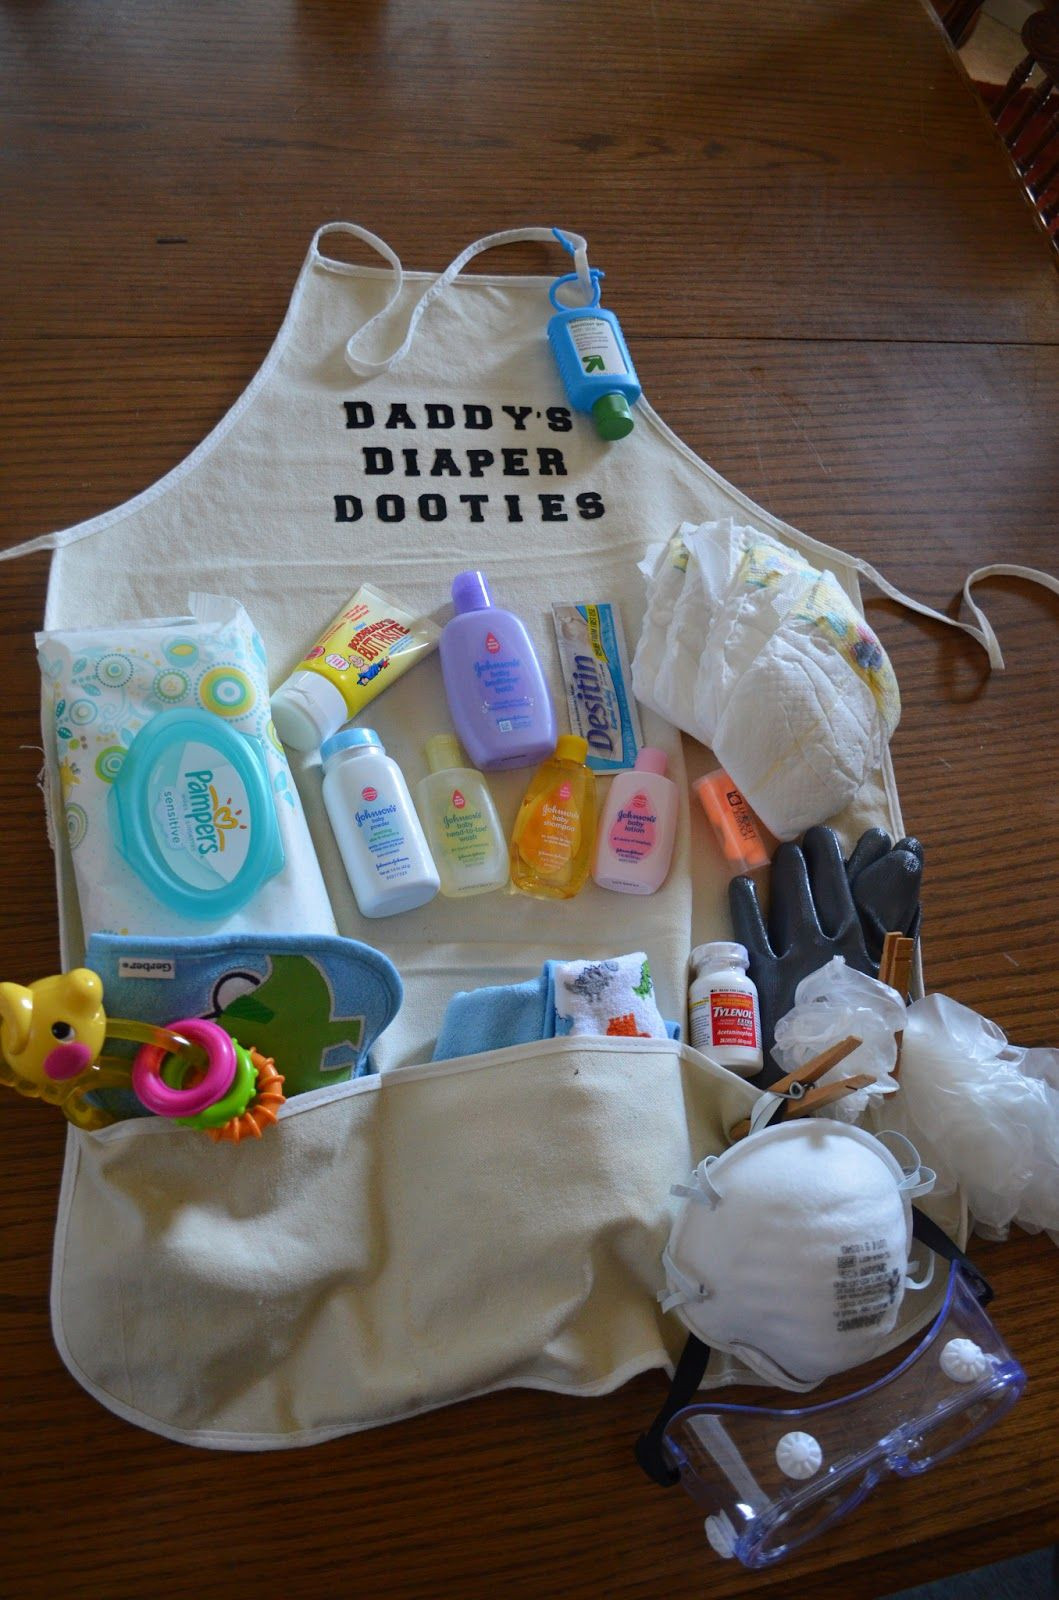 Gift Ideas For Dad From Baby Girl
 A diaper apron t Cute for first time dads